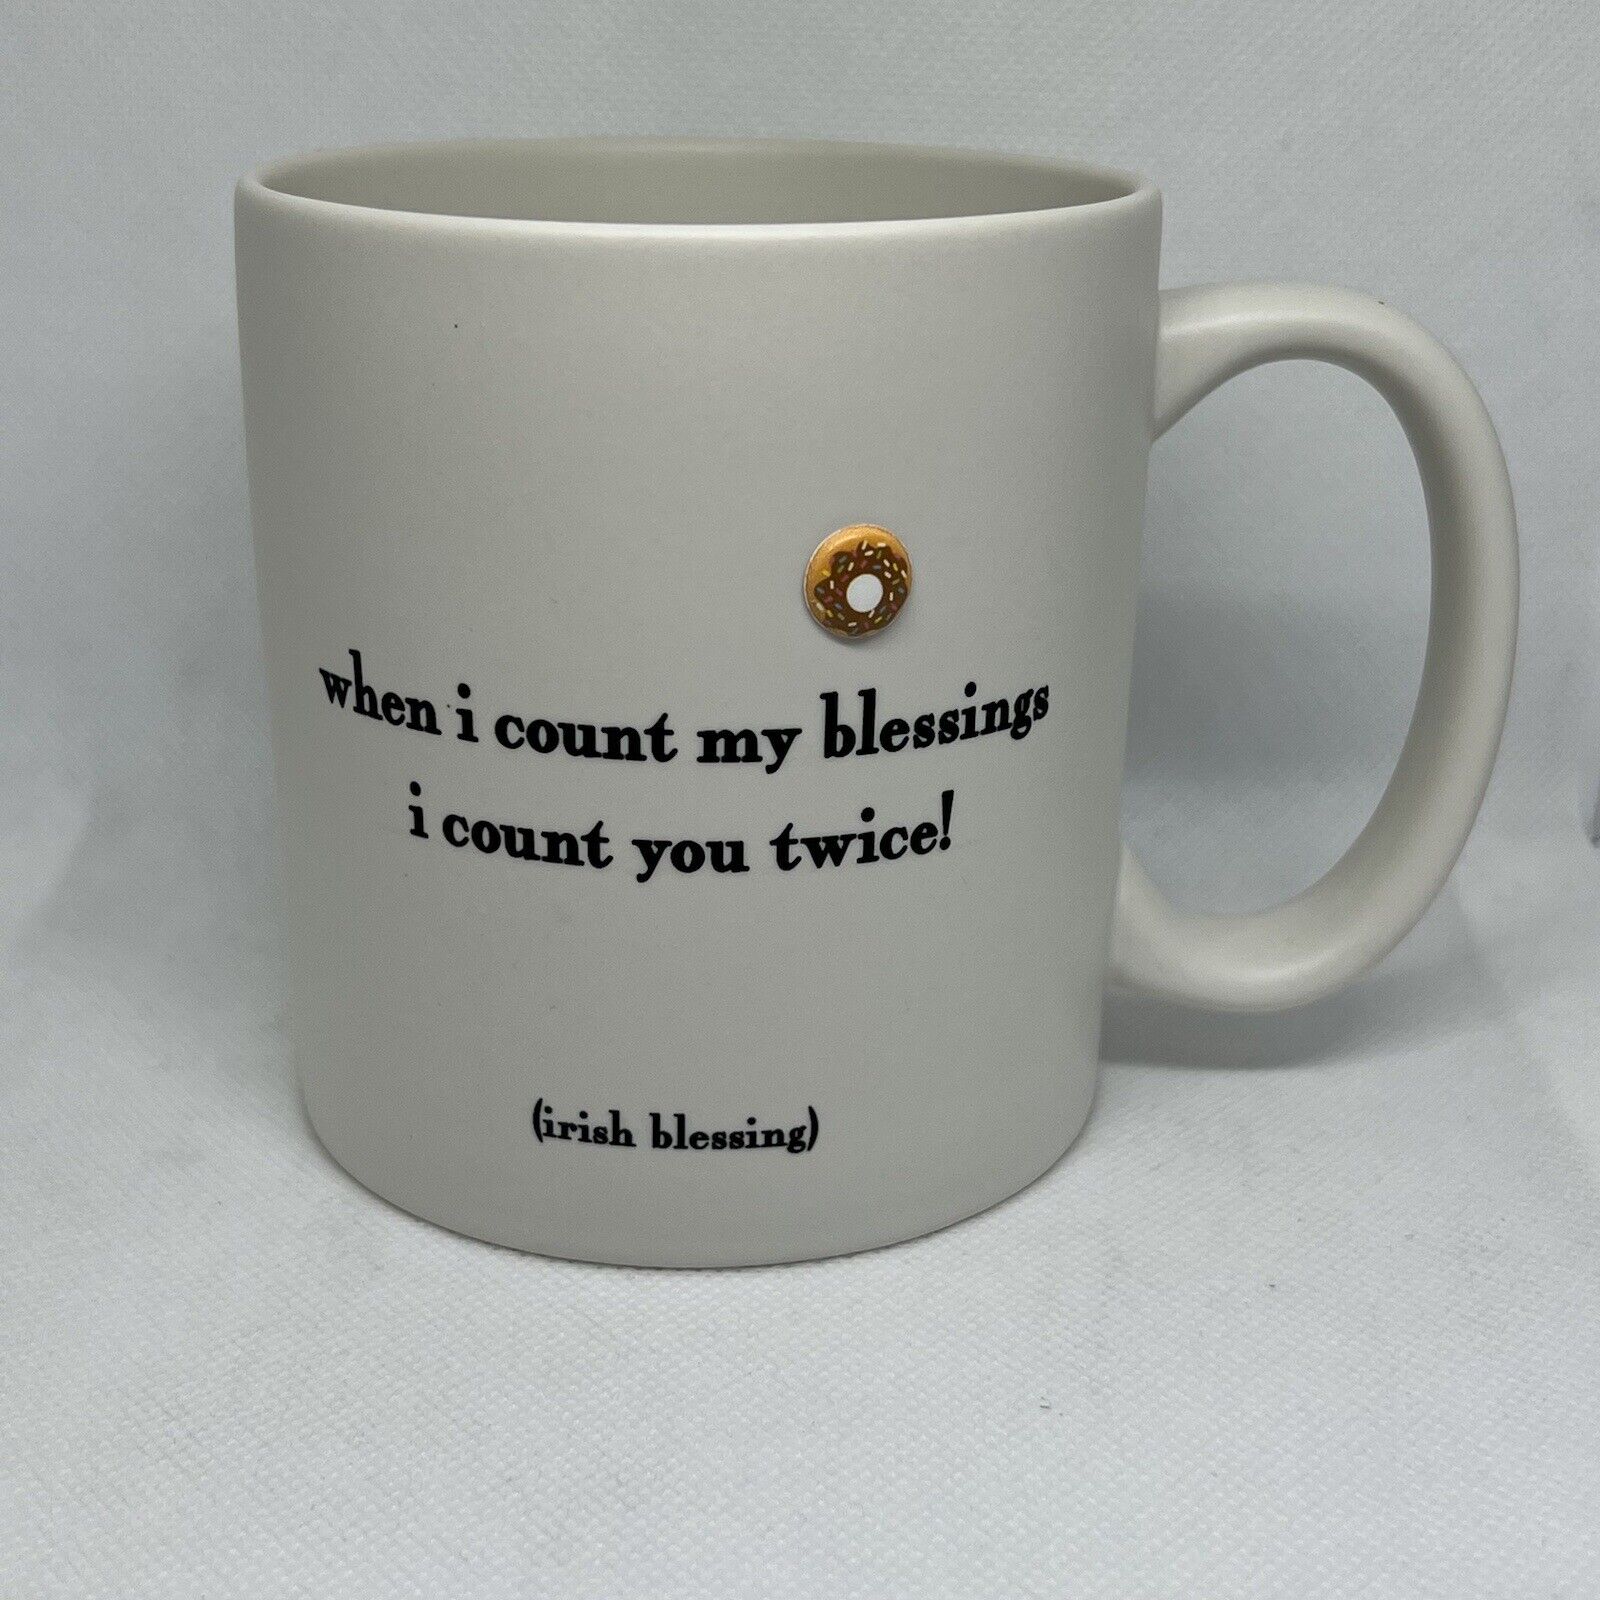 QUOTABLE Mugs 2015 Irish Blessing G170 Coffee Cup 14 oz NEW